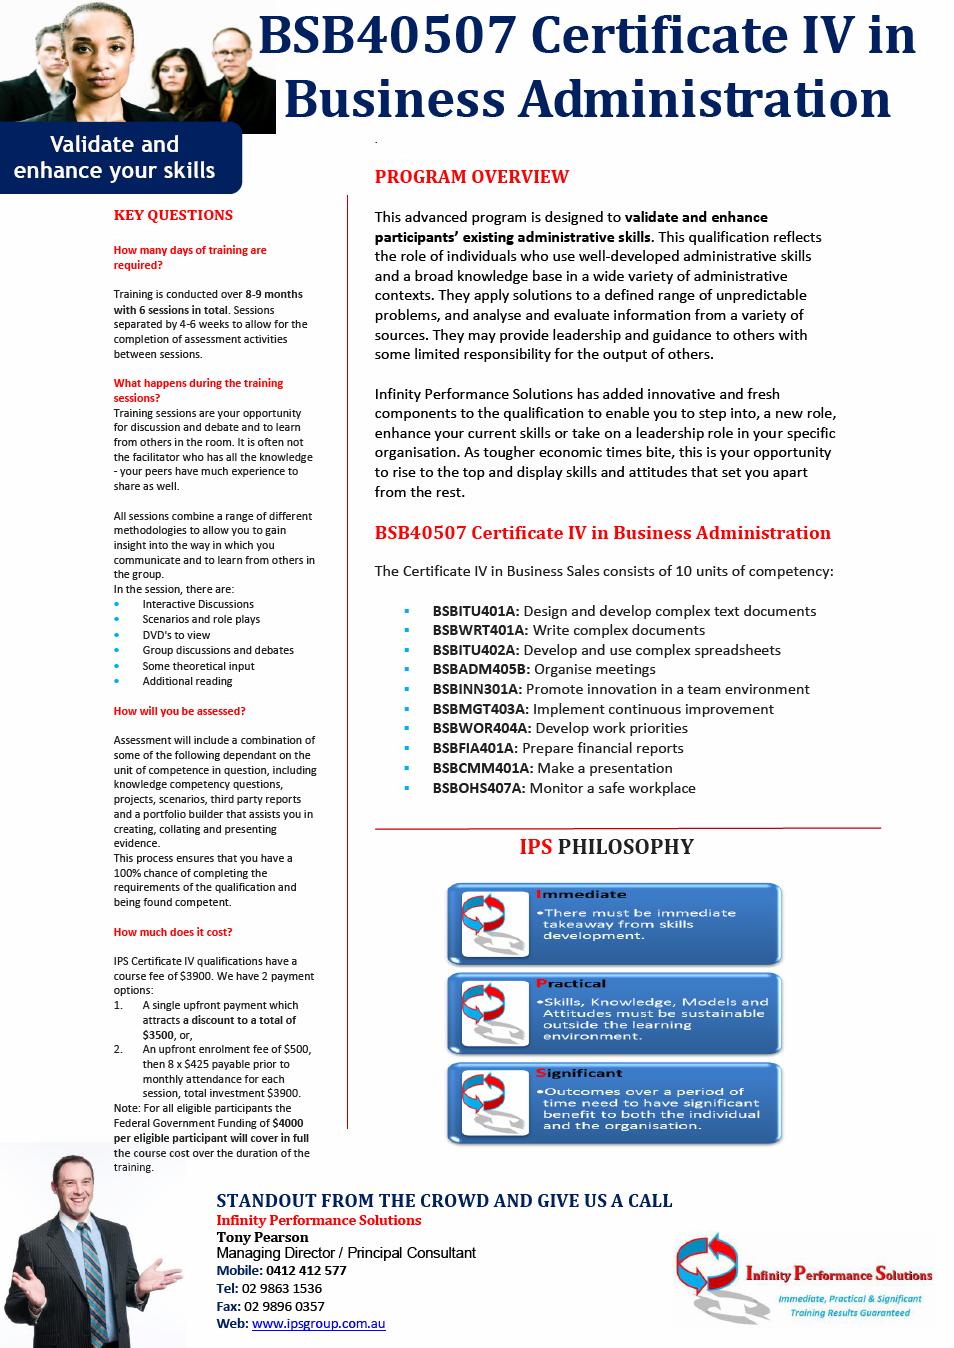 Infinity Performance Solutions BSB40507 Certificate IV in Business 